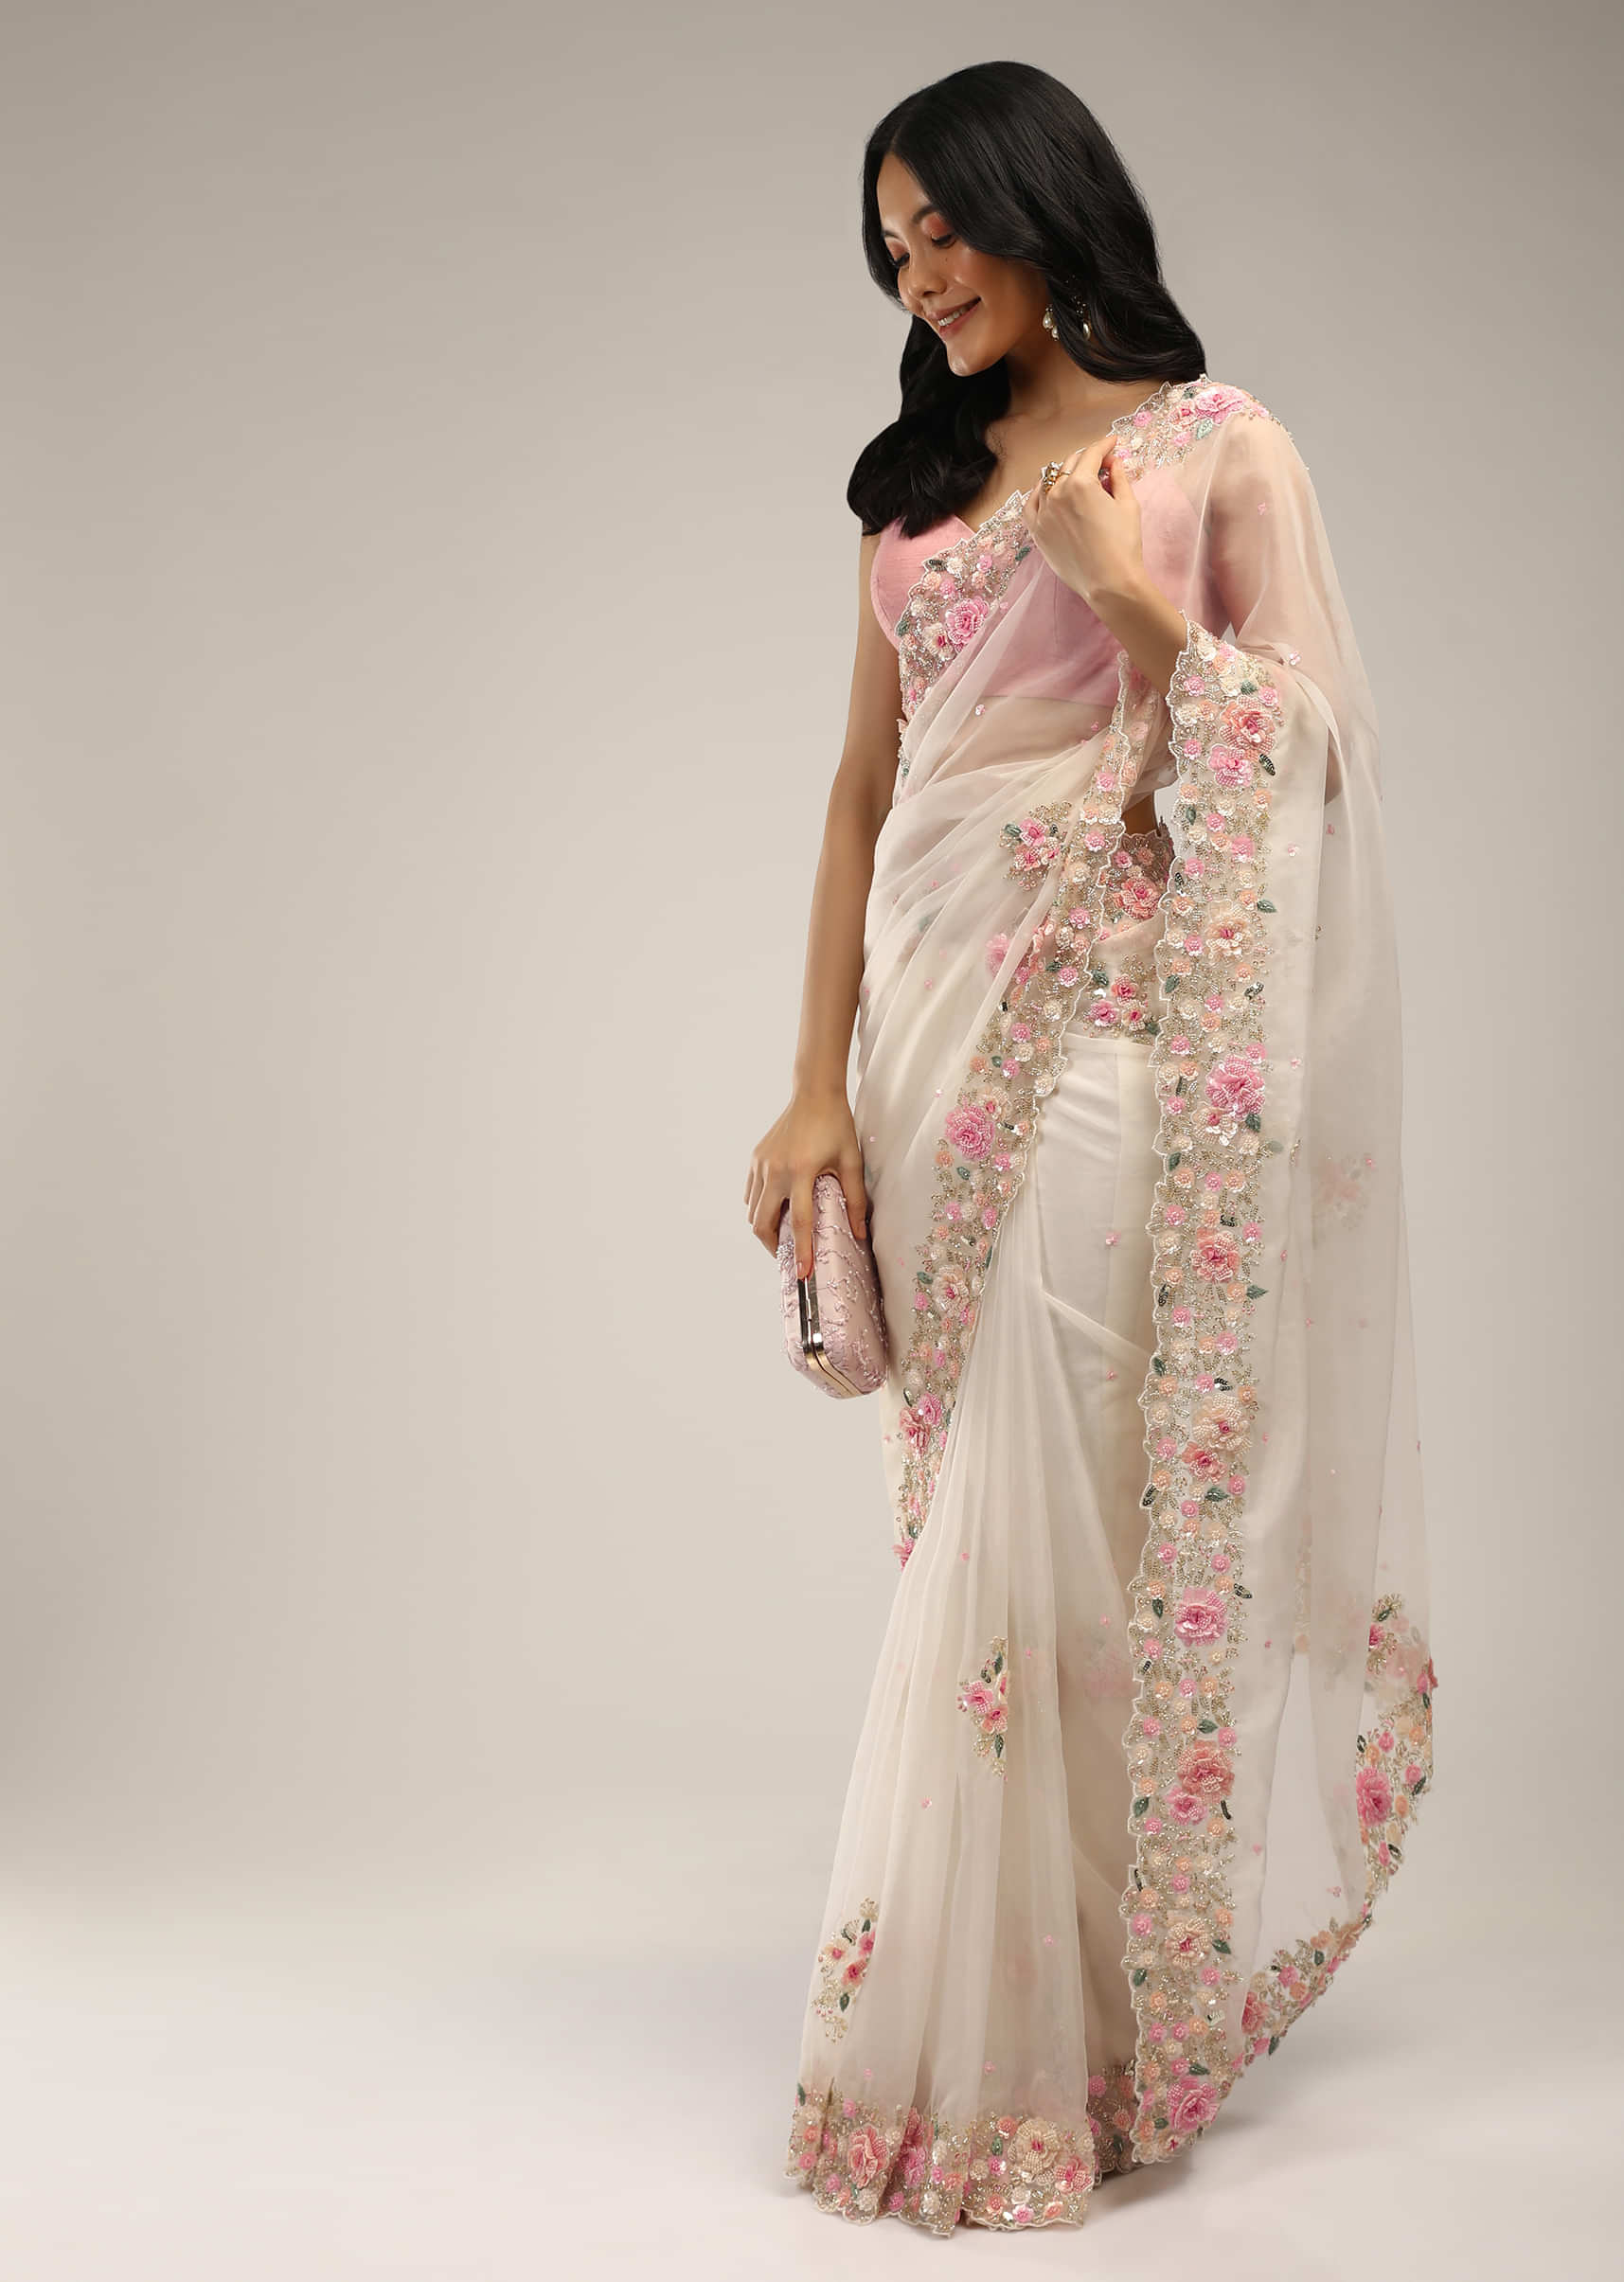 Powder White Saree In Organza With 3D Flower Embroidered Border And Buttis Featuring Multi Colored Moti And Sequins  